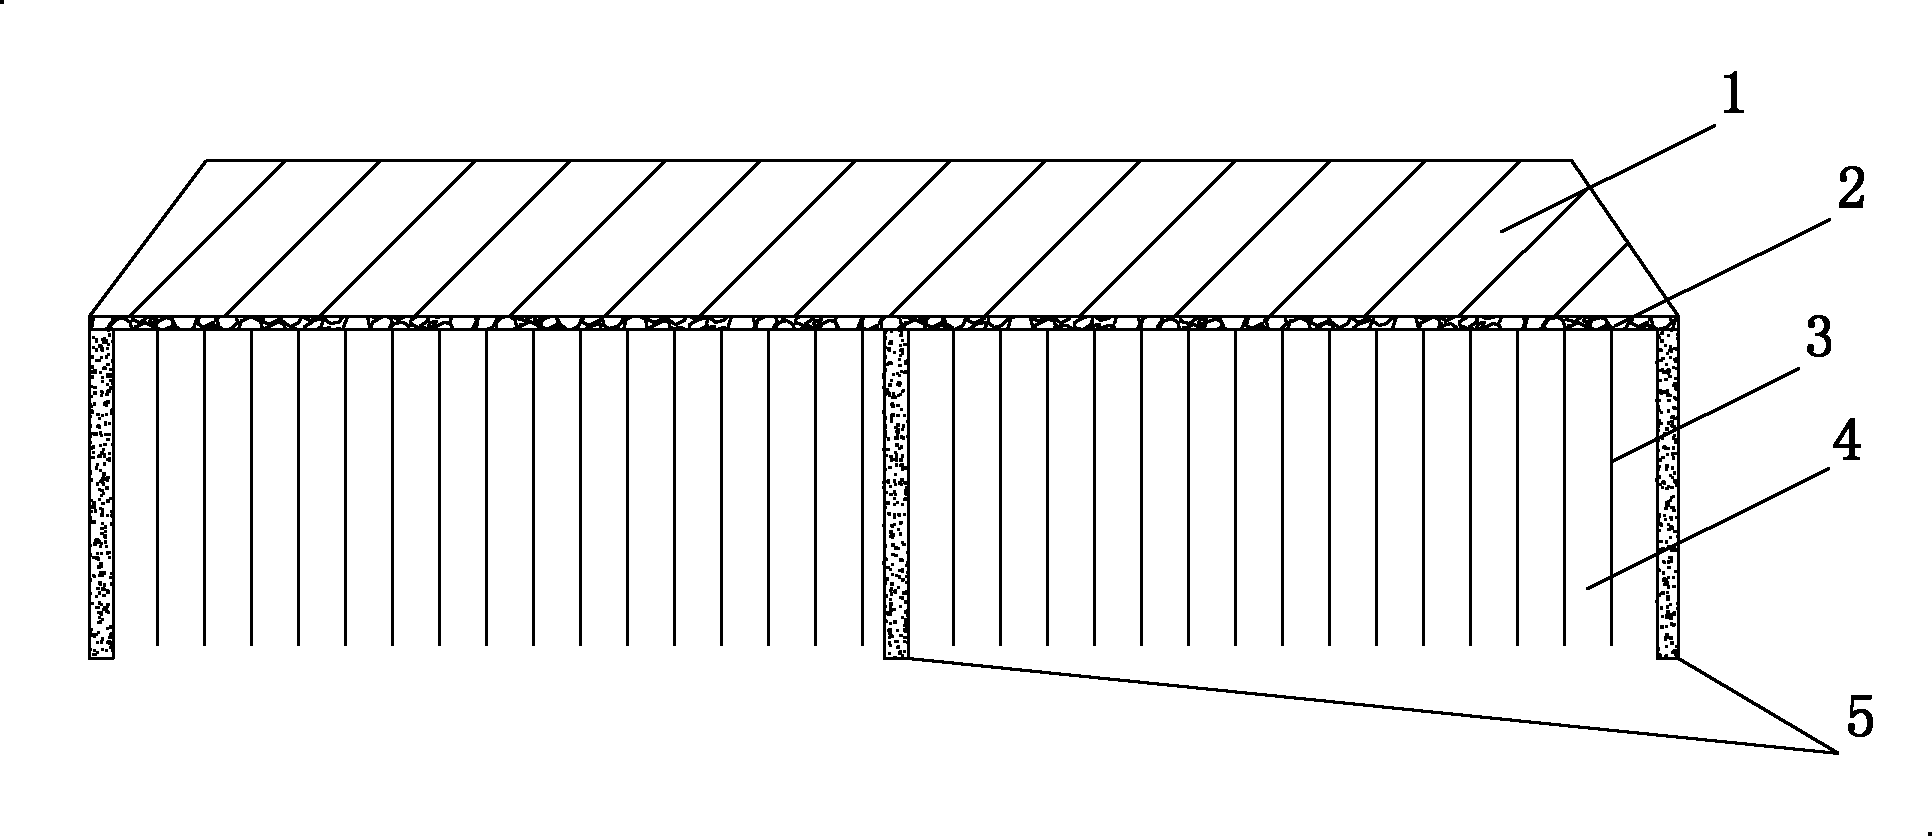 Soft soil foundation consolidation method combining drainage pile loading prepressing and deep mixing piles